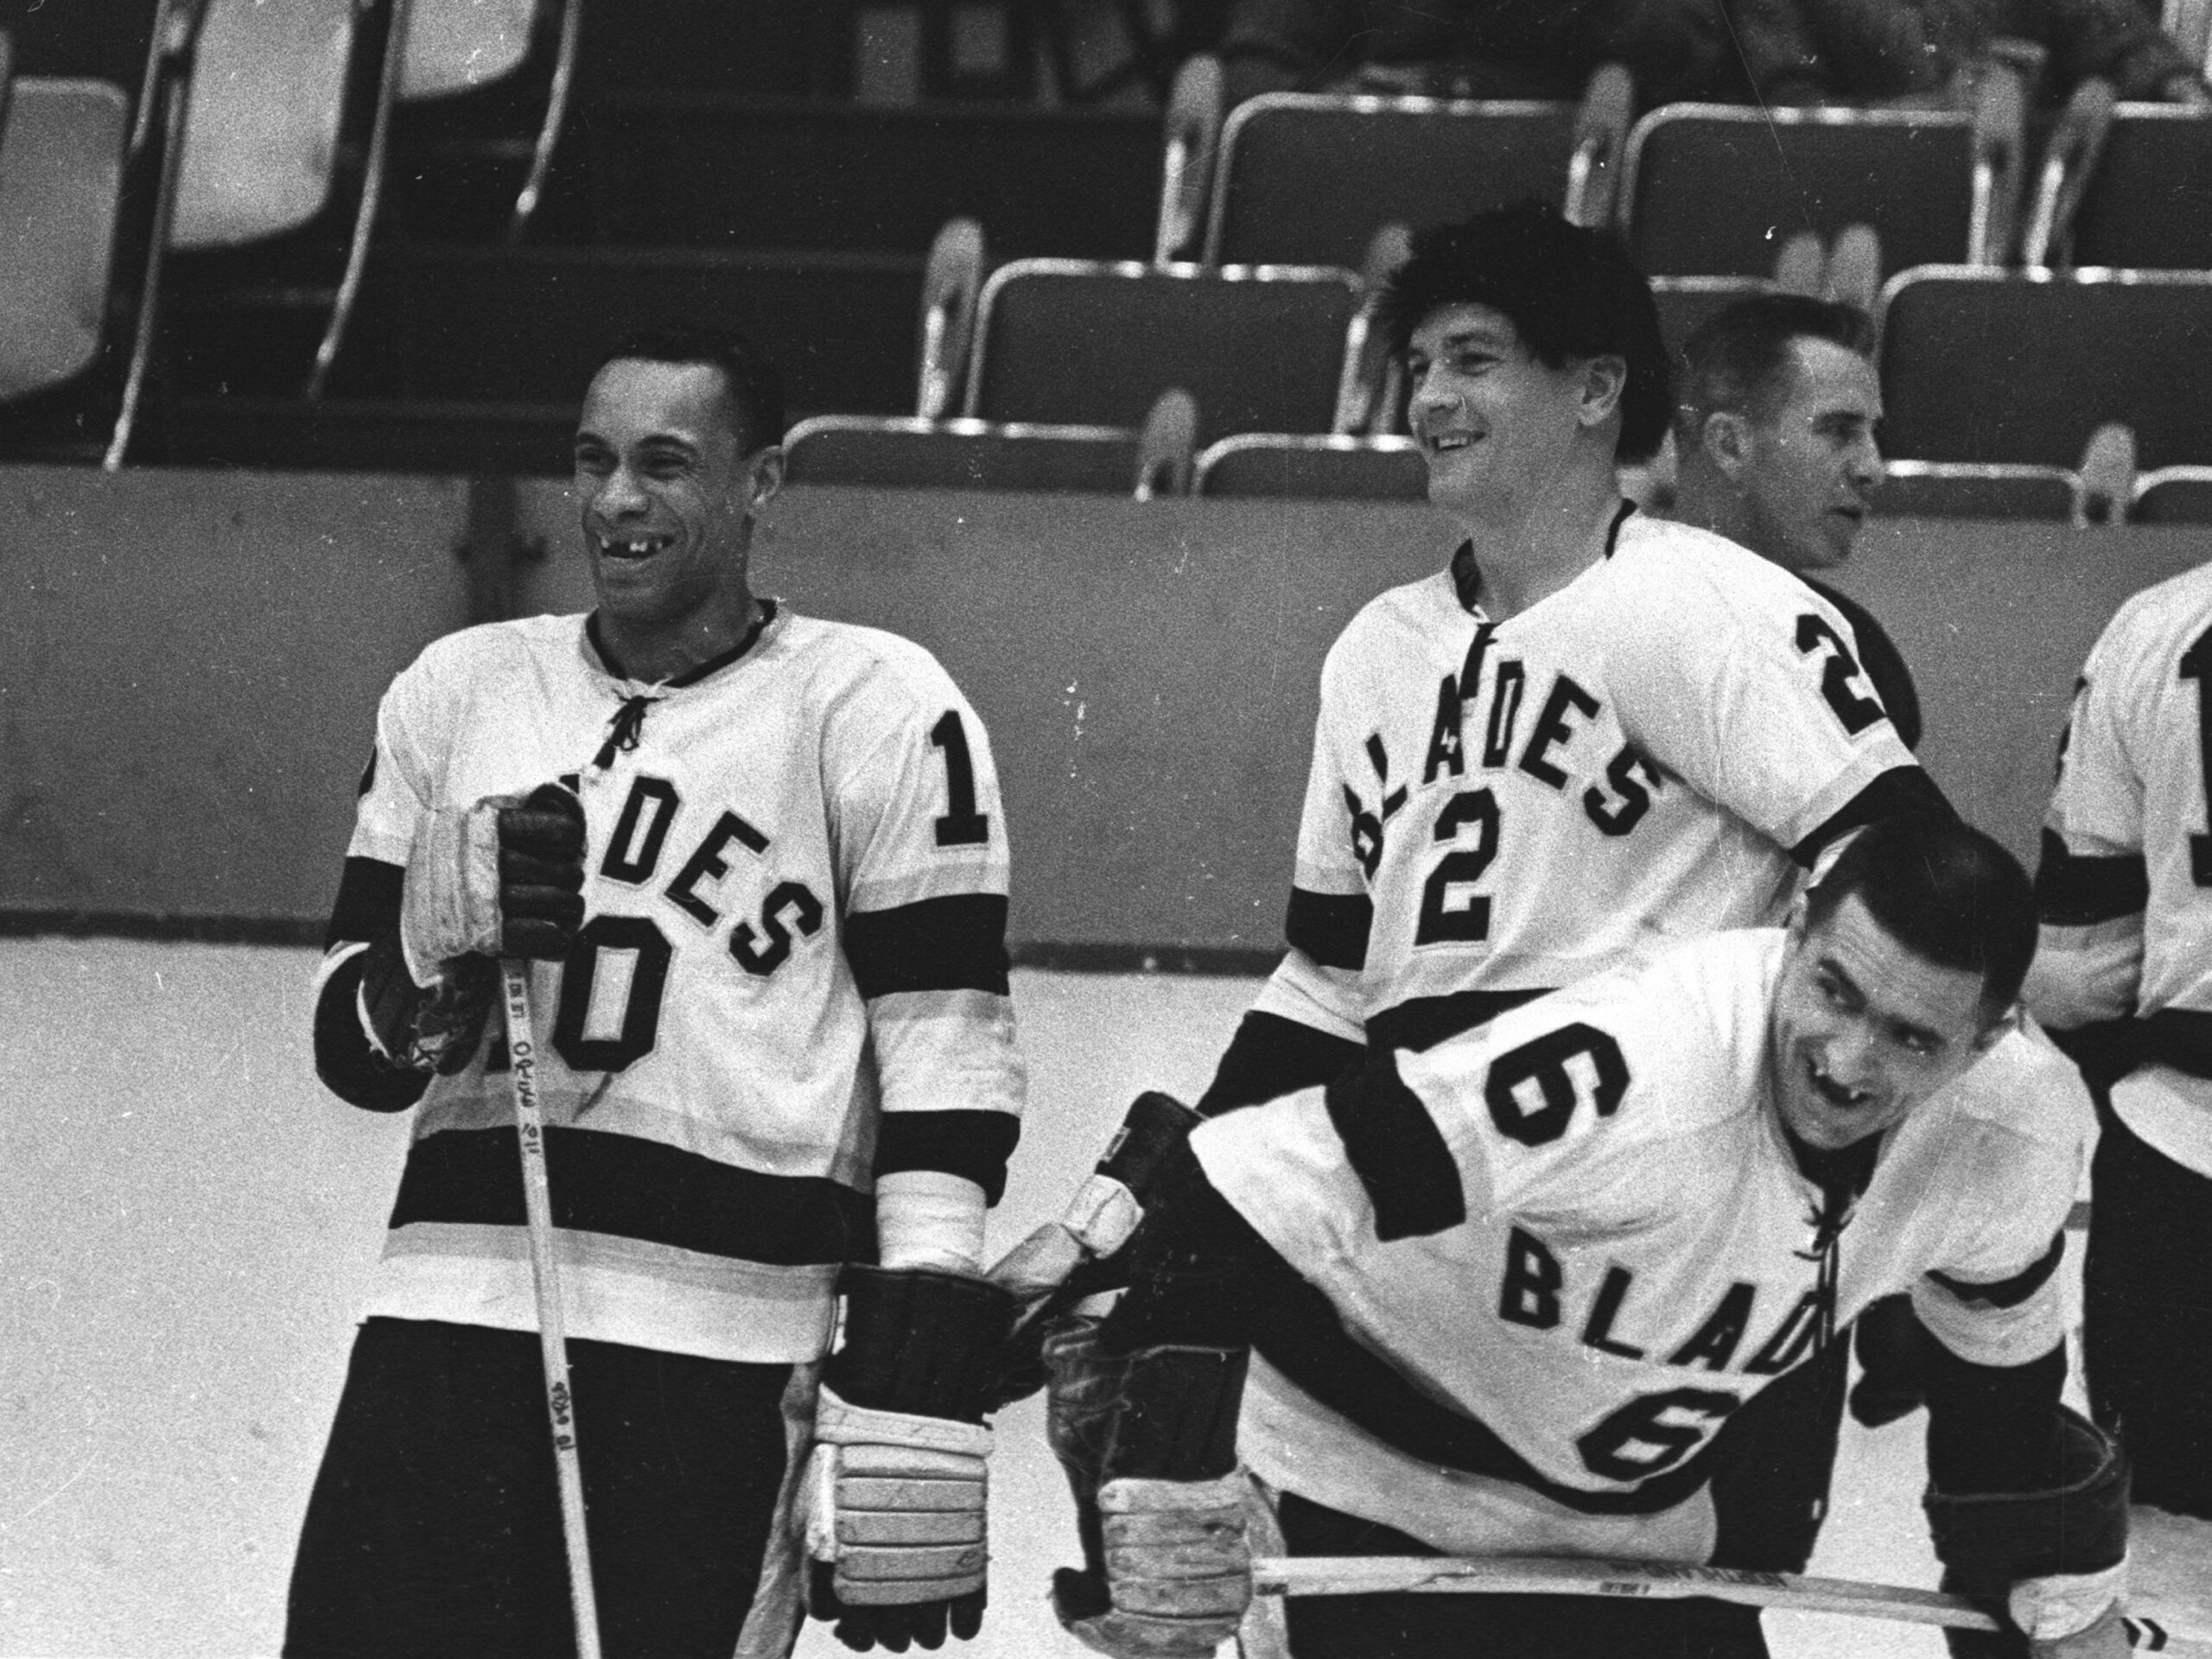 Willie O'Ree pained by racism in society, hockey